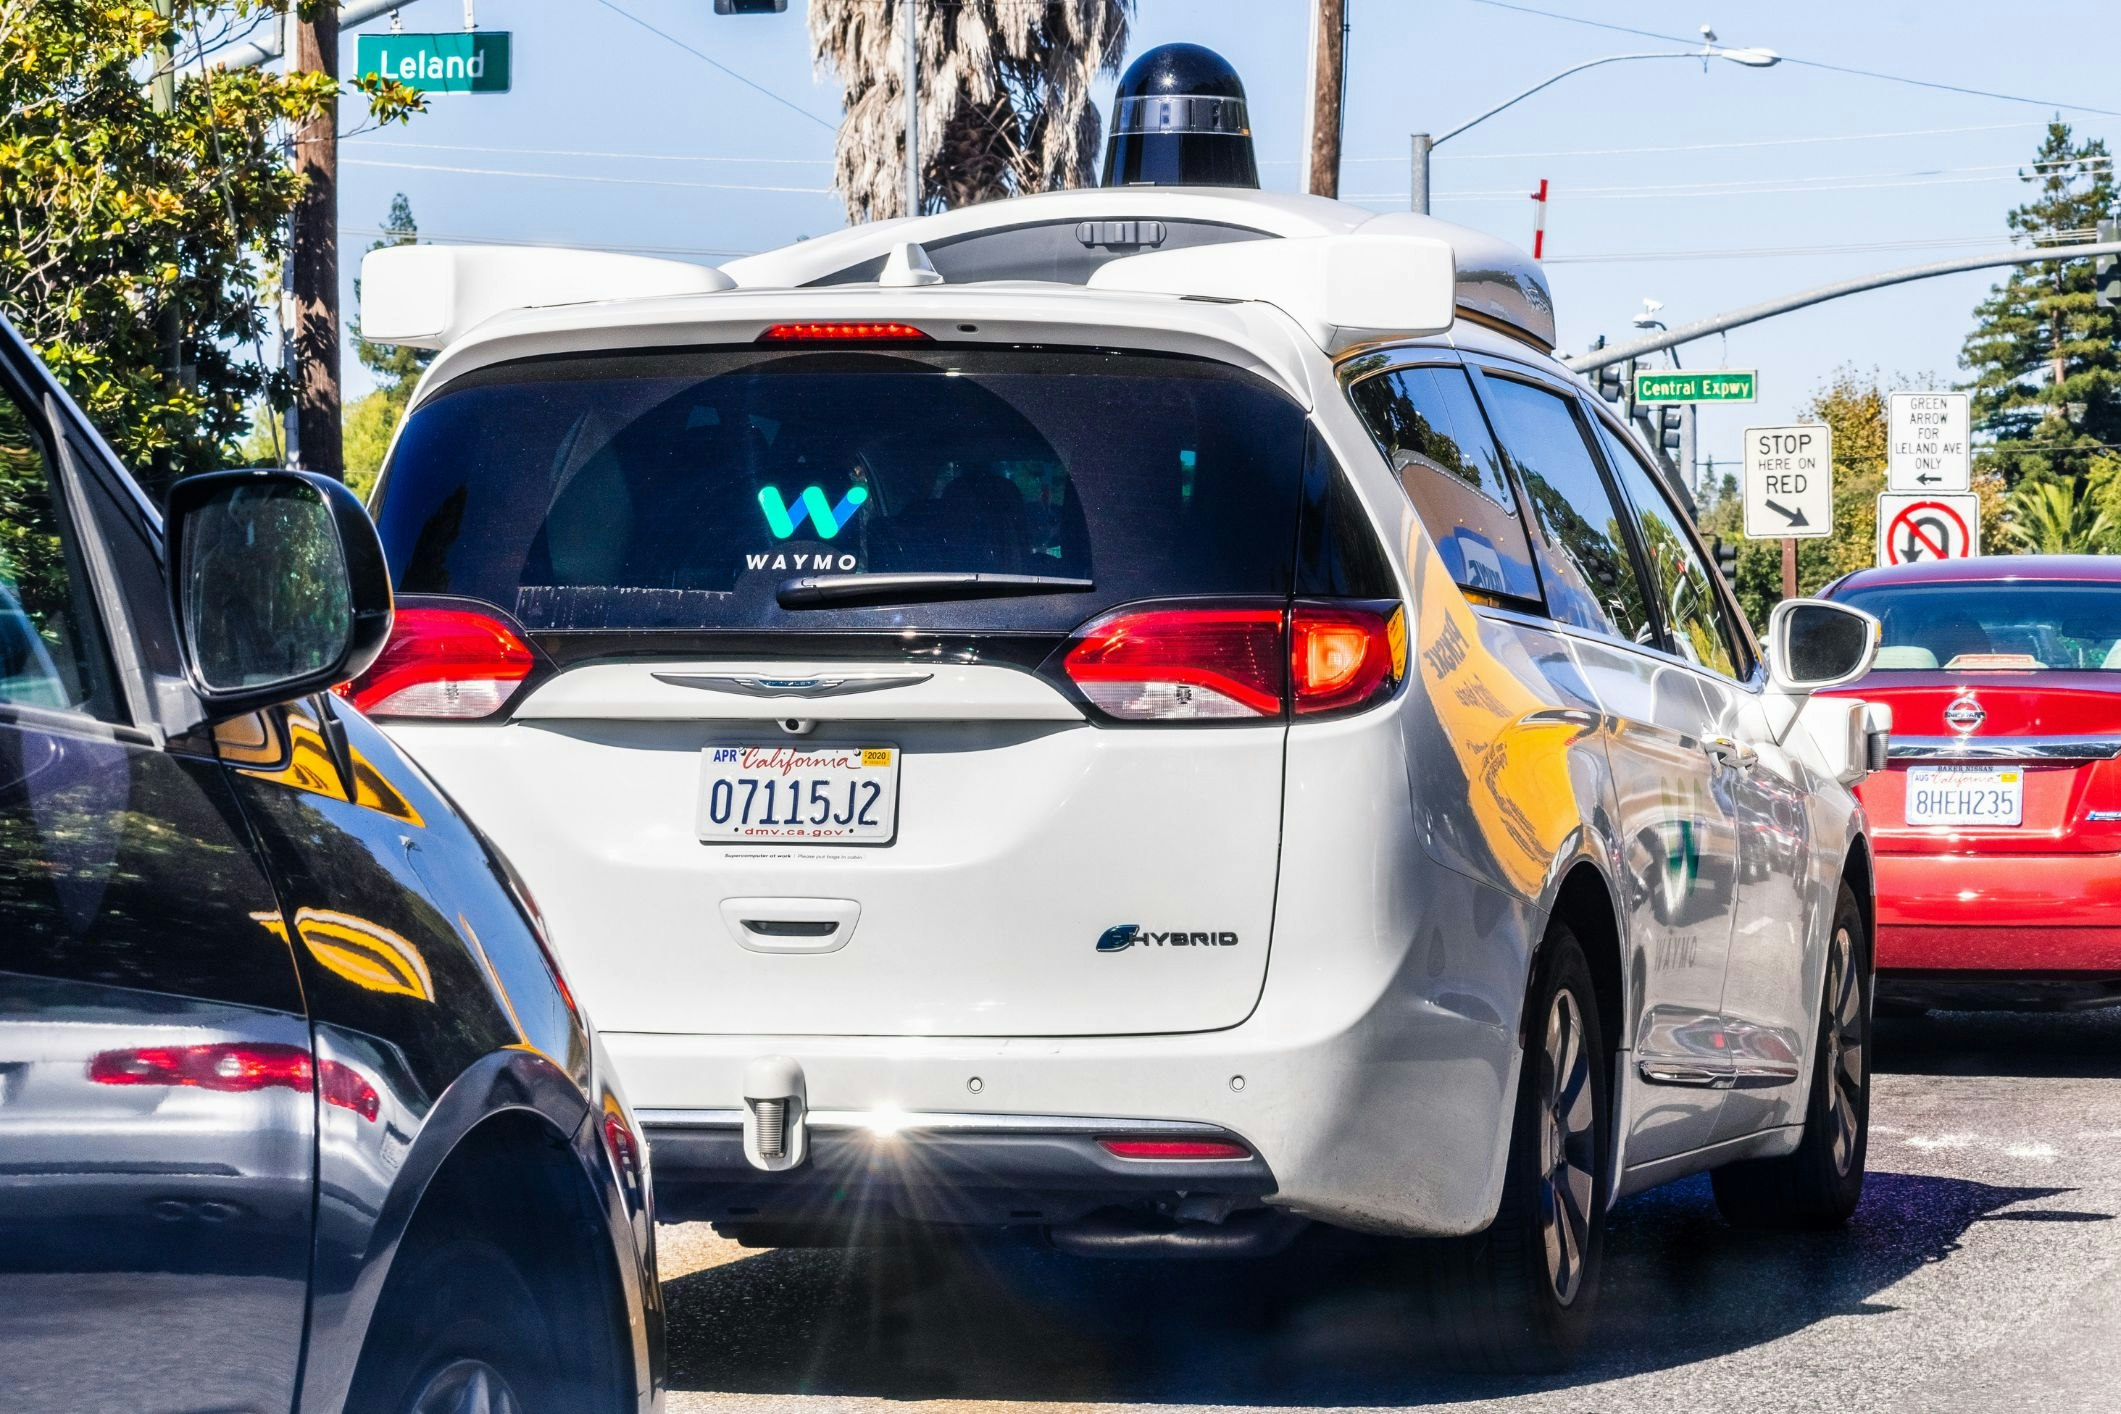 <p>Waymo, formerly known as the ‘Google Self-Driving Car Project’ had been founded to increase mobility access and reduce human error associated harm. [Source: Sundry Photography via Shutterstock]</p>
